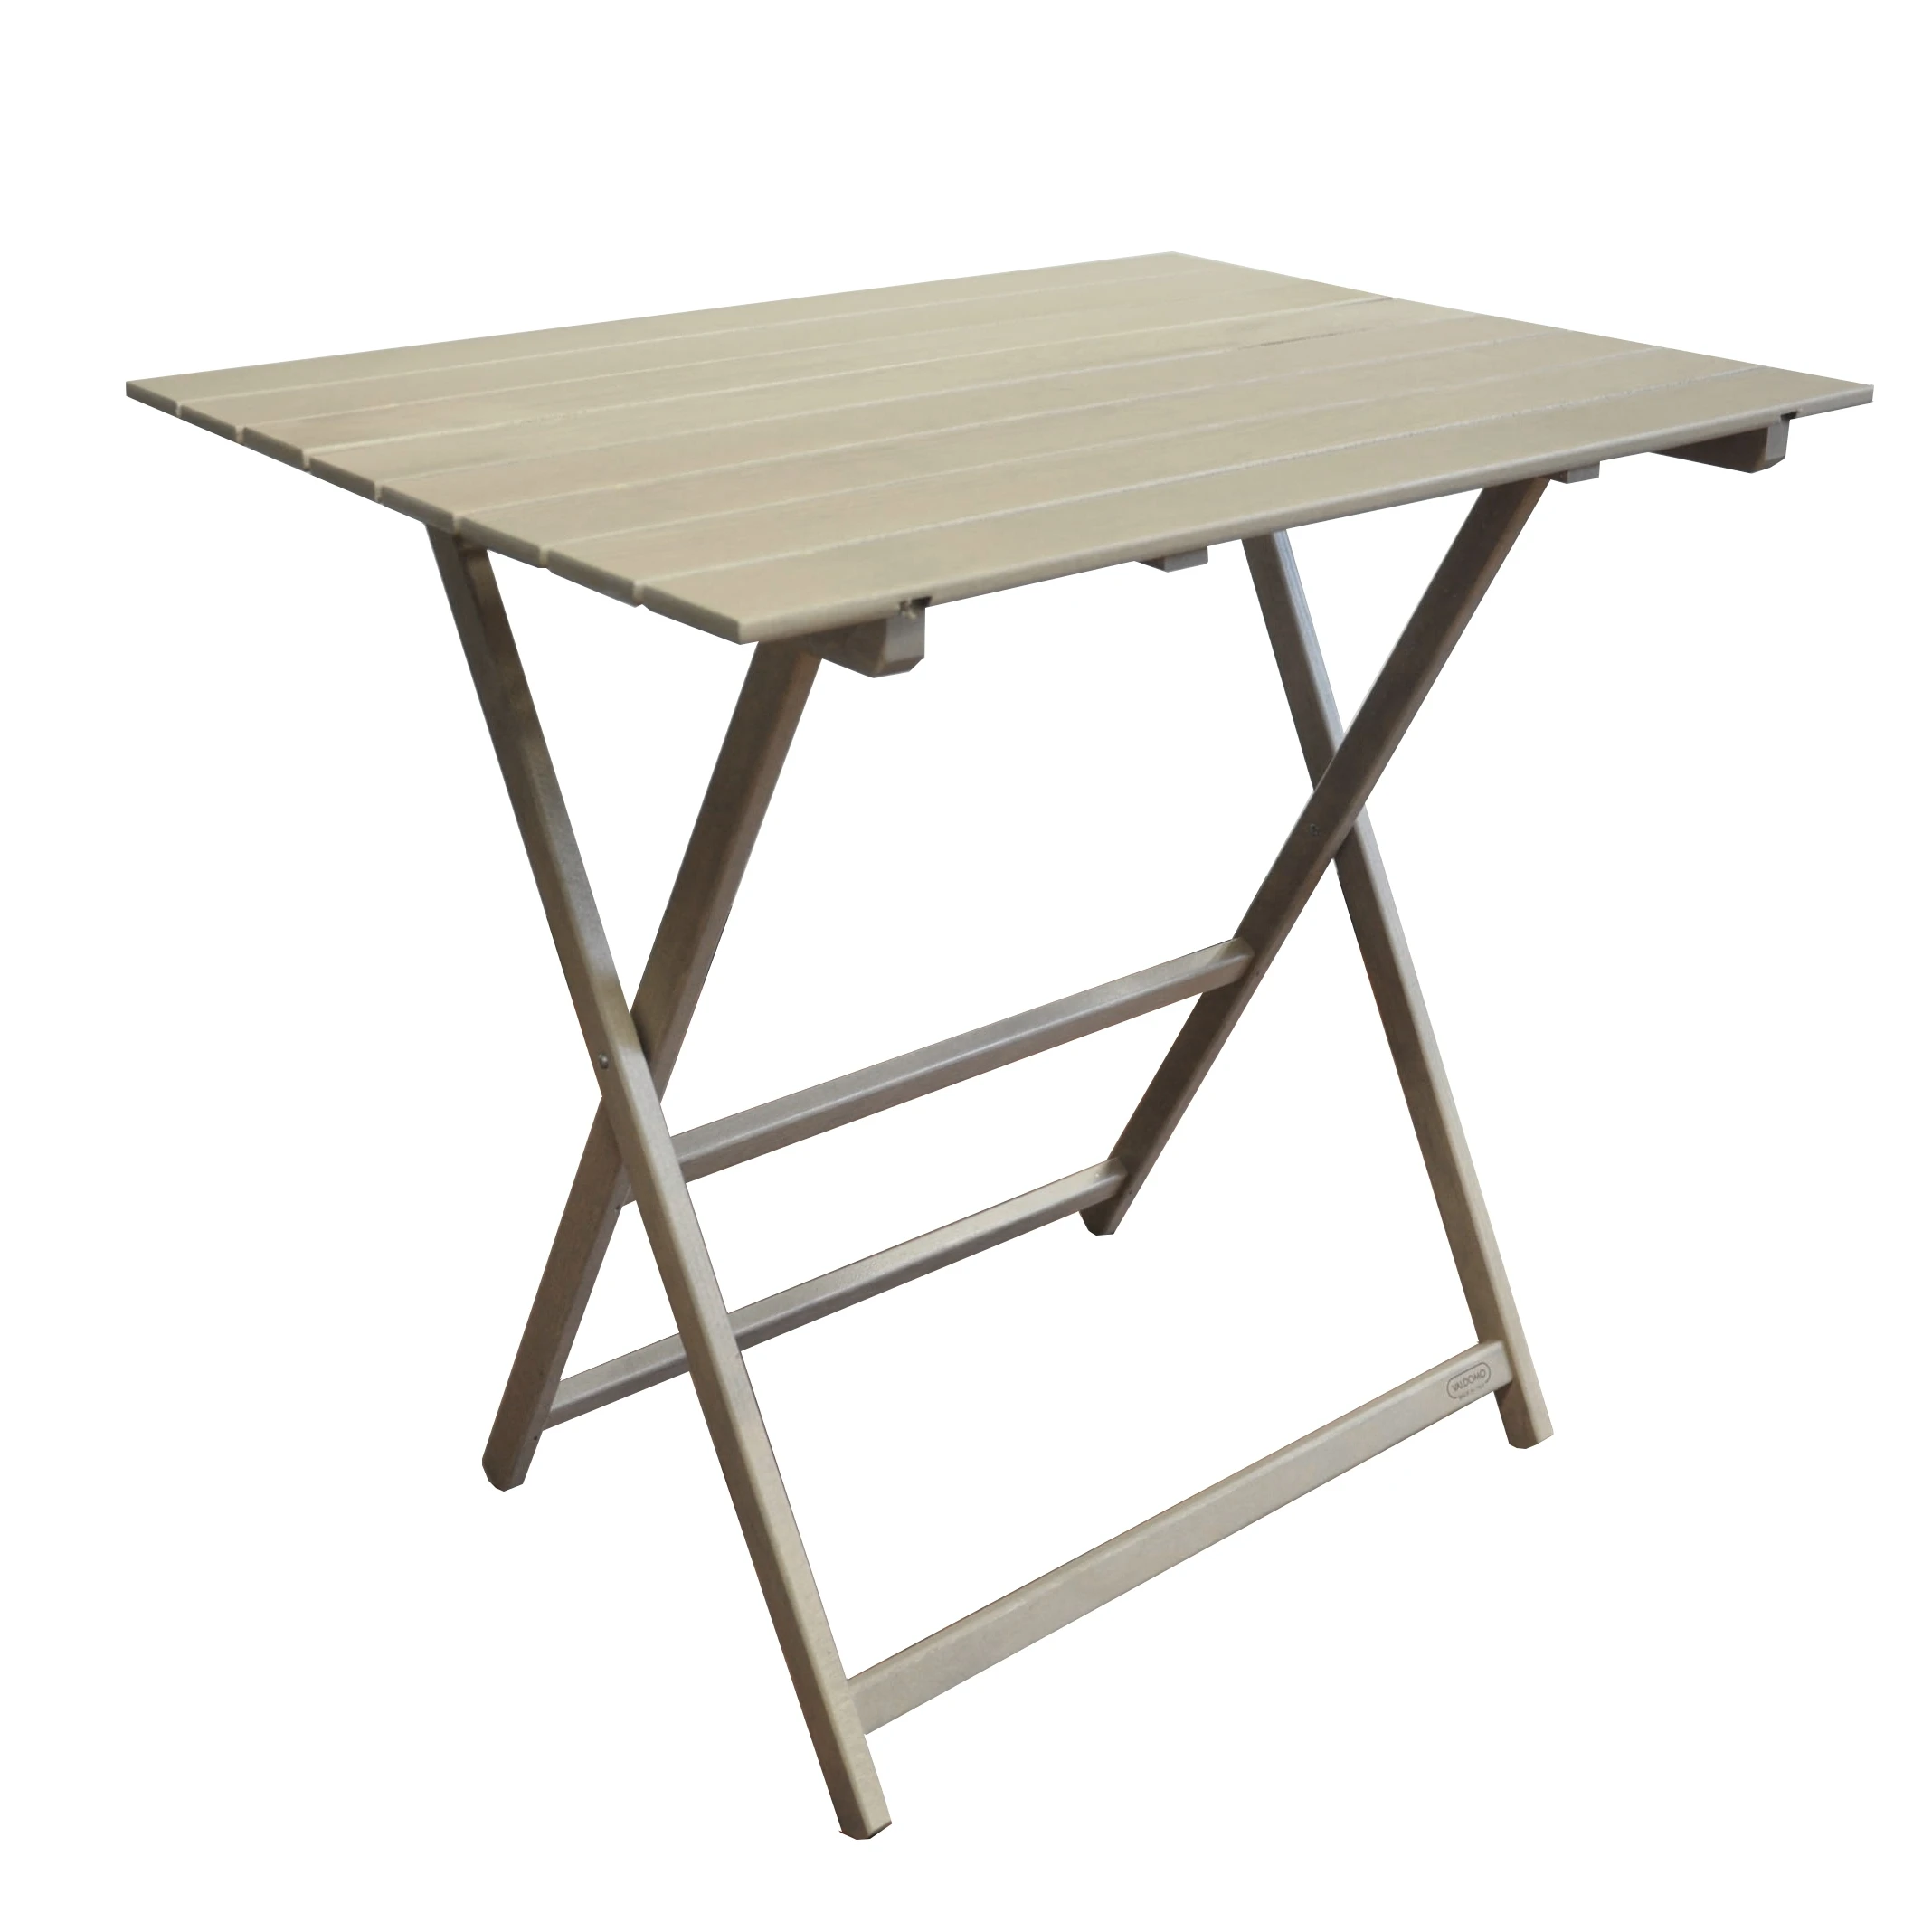 High quality Folding Set table cm 60x80 with 2 chairs in solid beech wood grey color for indoor and outdoor use Made in Italy